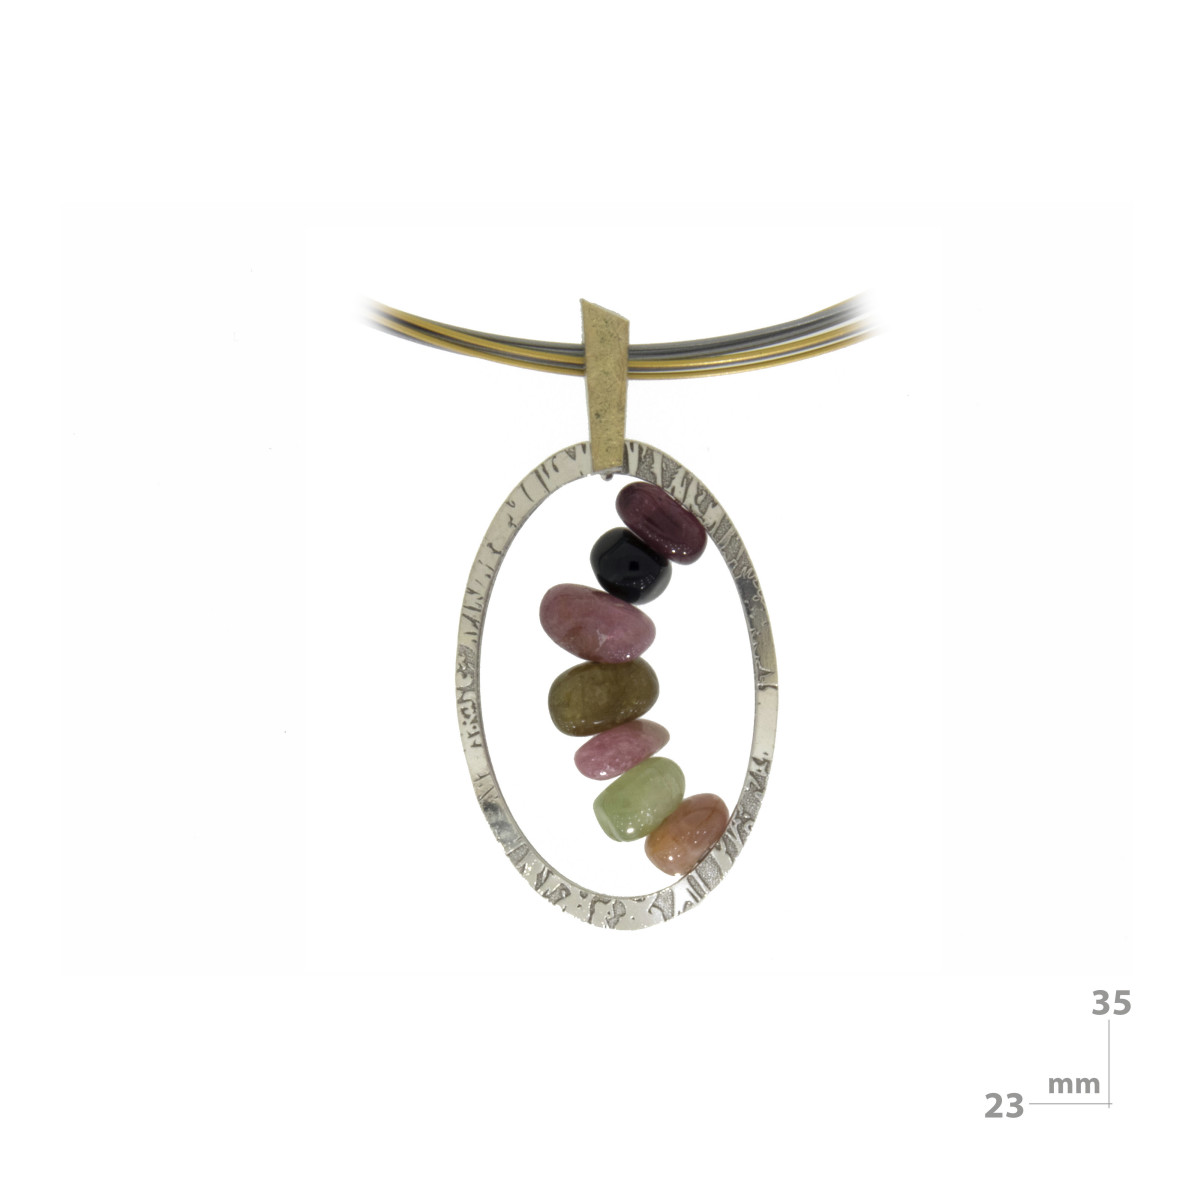 Pendant made of silver, 18k gold and tourmalines